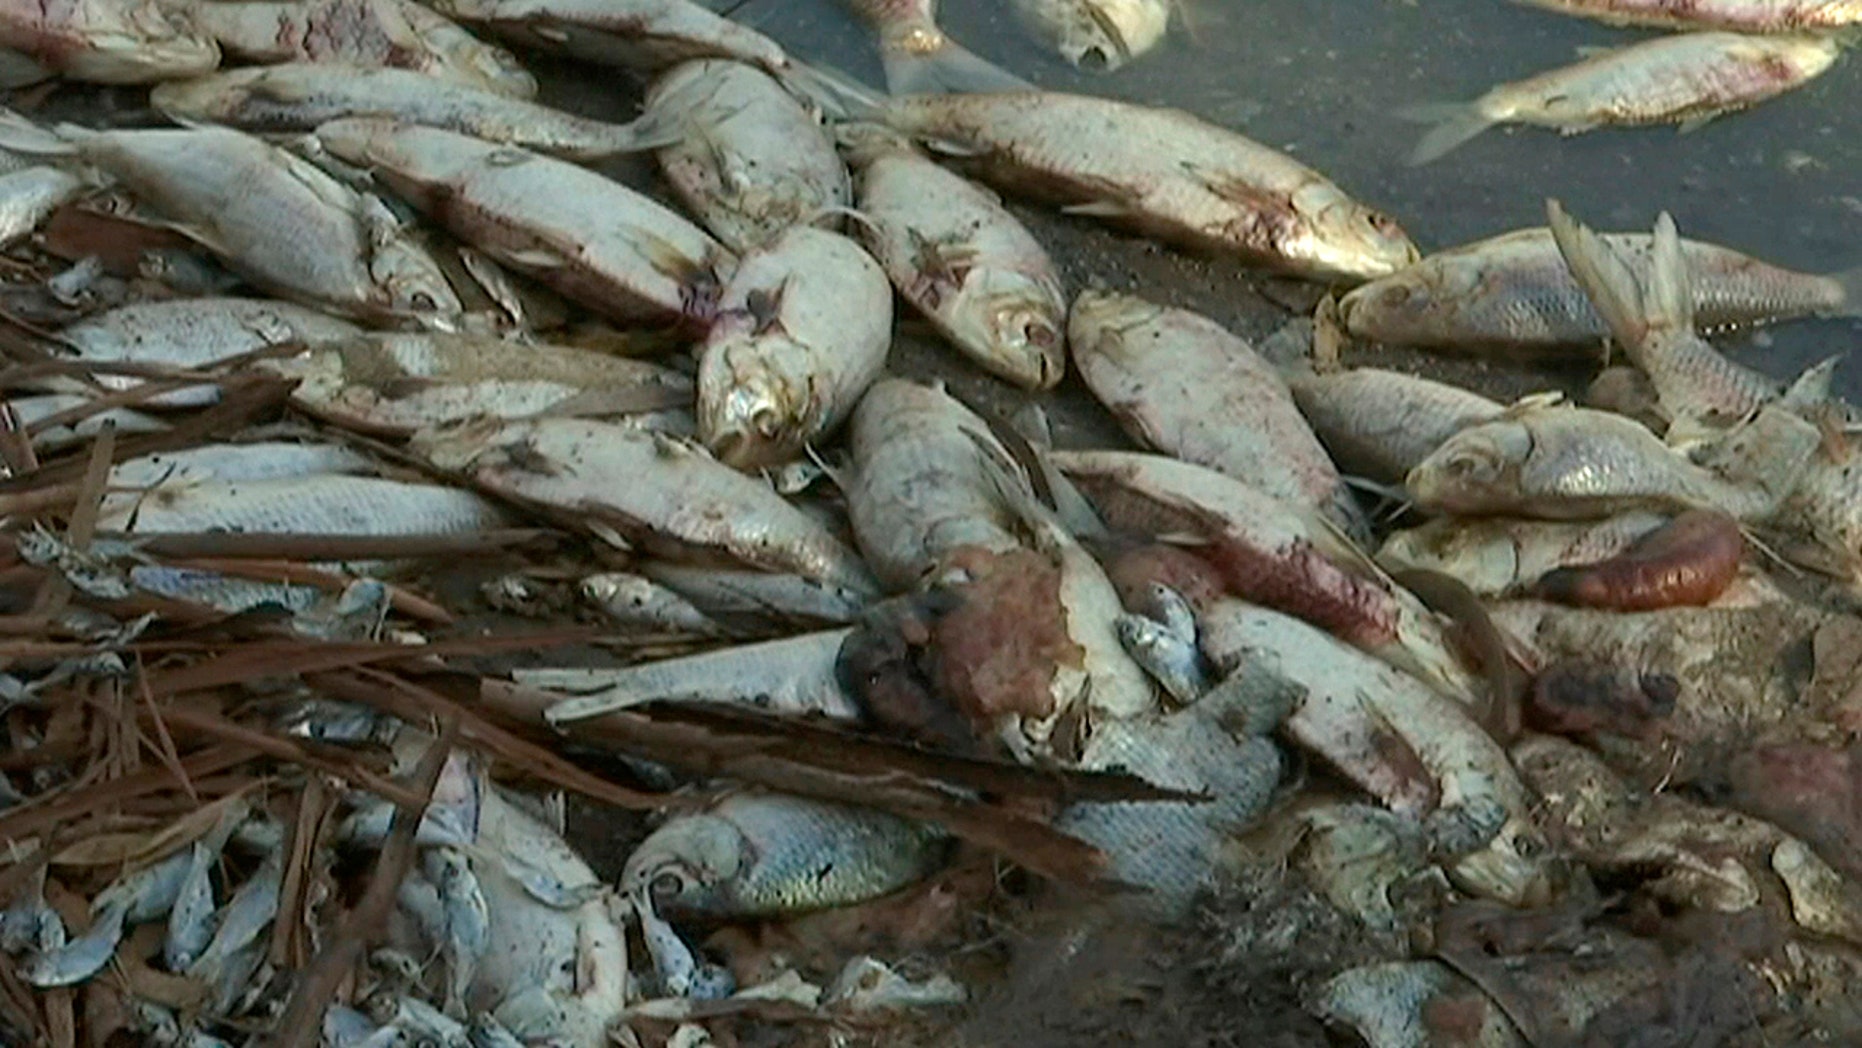 Australian wildlife officials to pump oxygen into rivers after thousands of fish are killed in heatwave